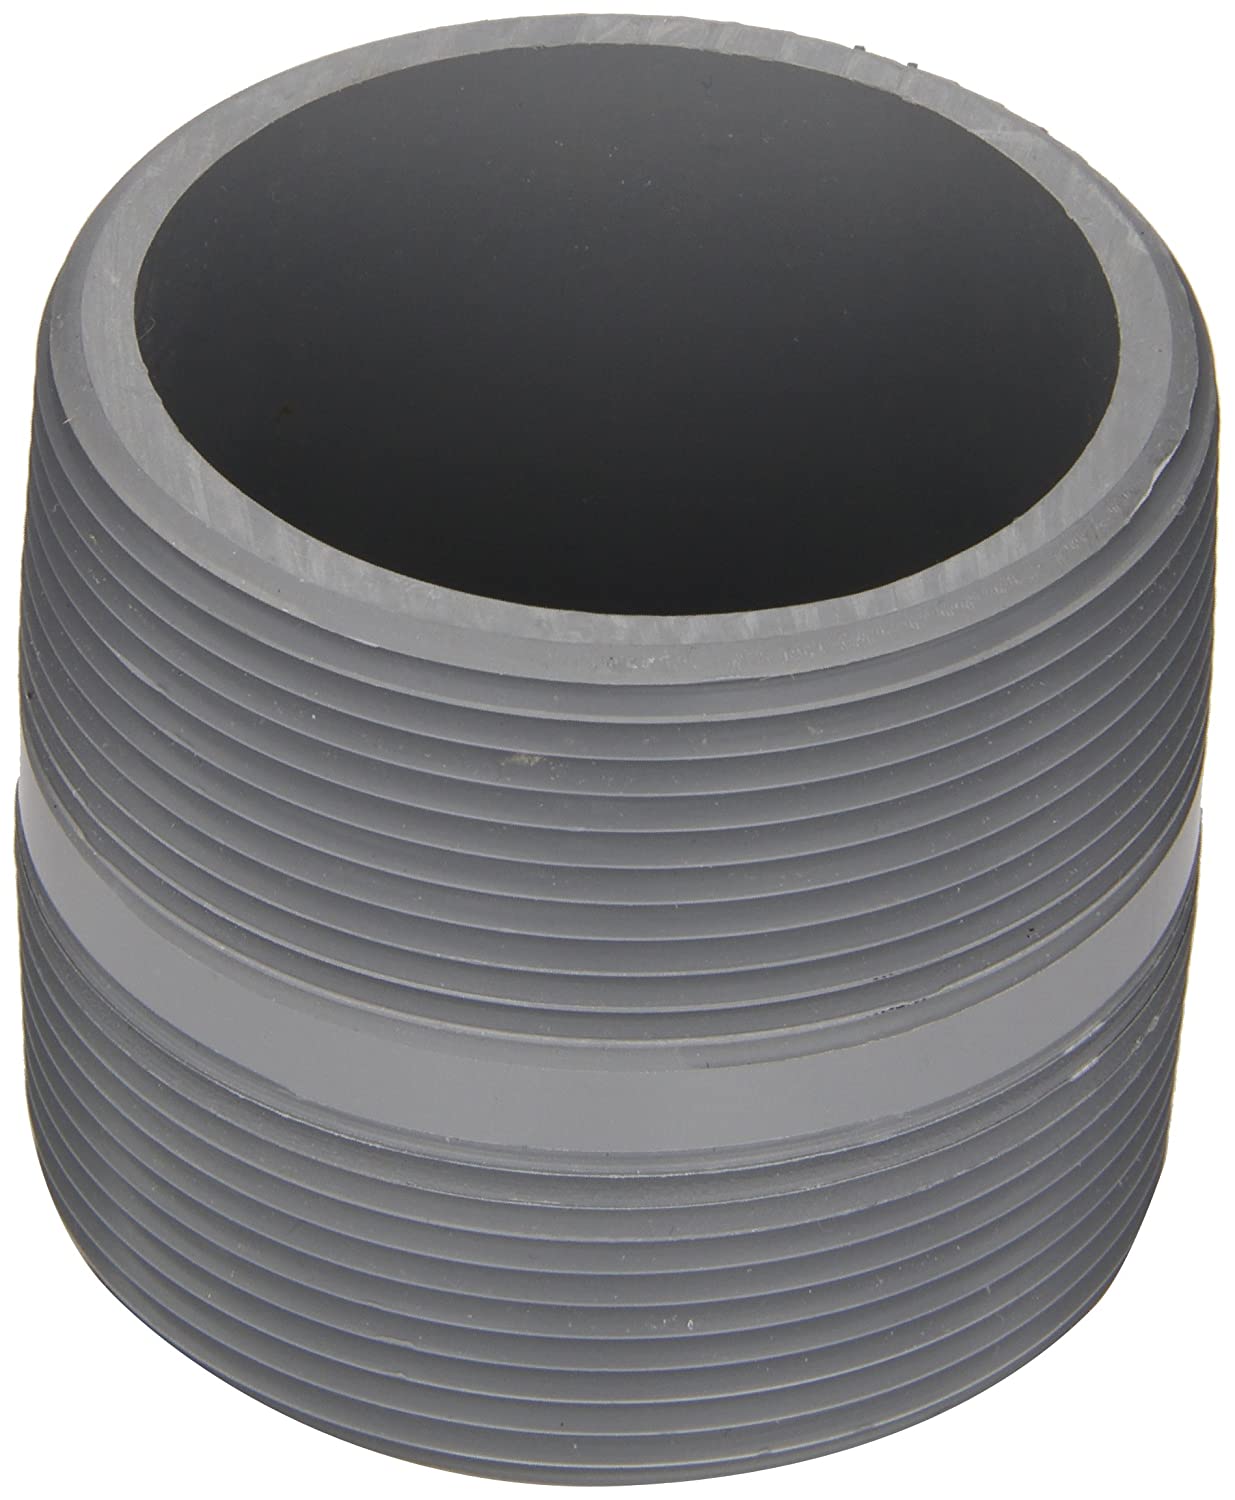 Spears 885-040C - CPVC Pipe Fitting, Nipple, Schedule 80, Gray, 1-1/4" NPT Male, 4" Length